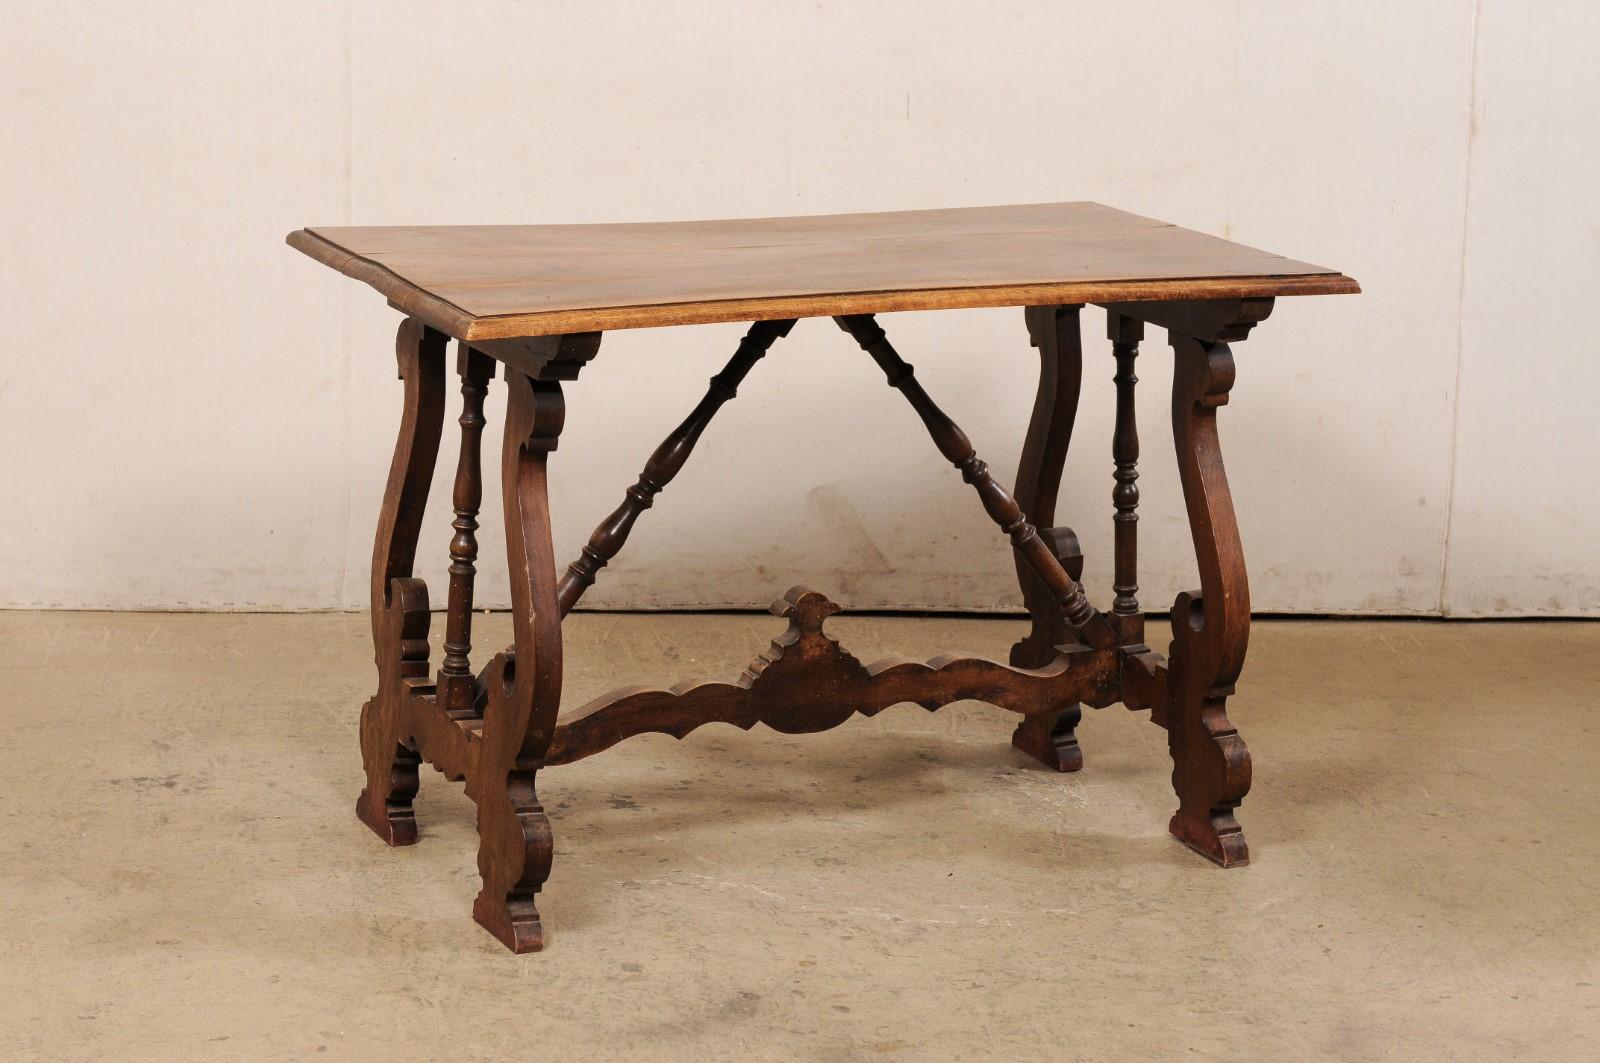 A Spanish walnut wood table with lyre legs from the 19th century. This antique table from Spain features a rectangular-shaped top which is raised upon a pair of sinuously carved trestle legs in a lyre design. The legs each have a spindle-carved post